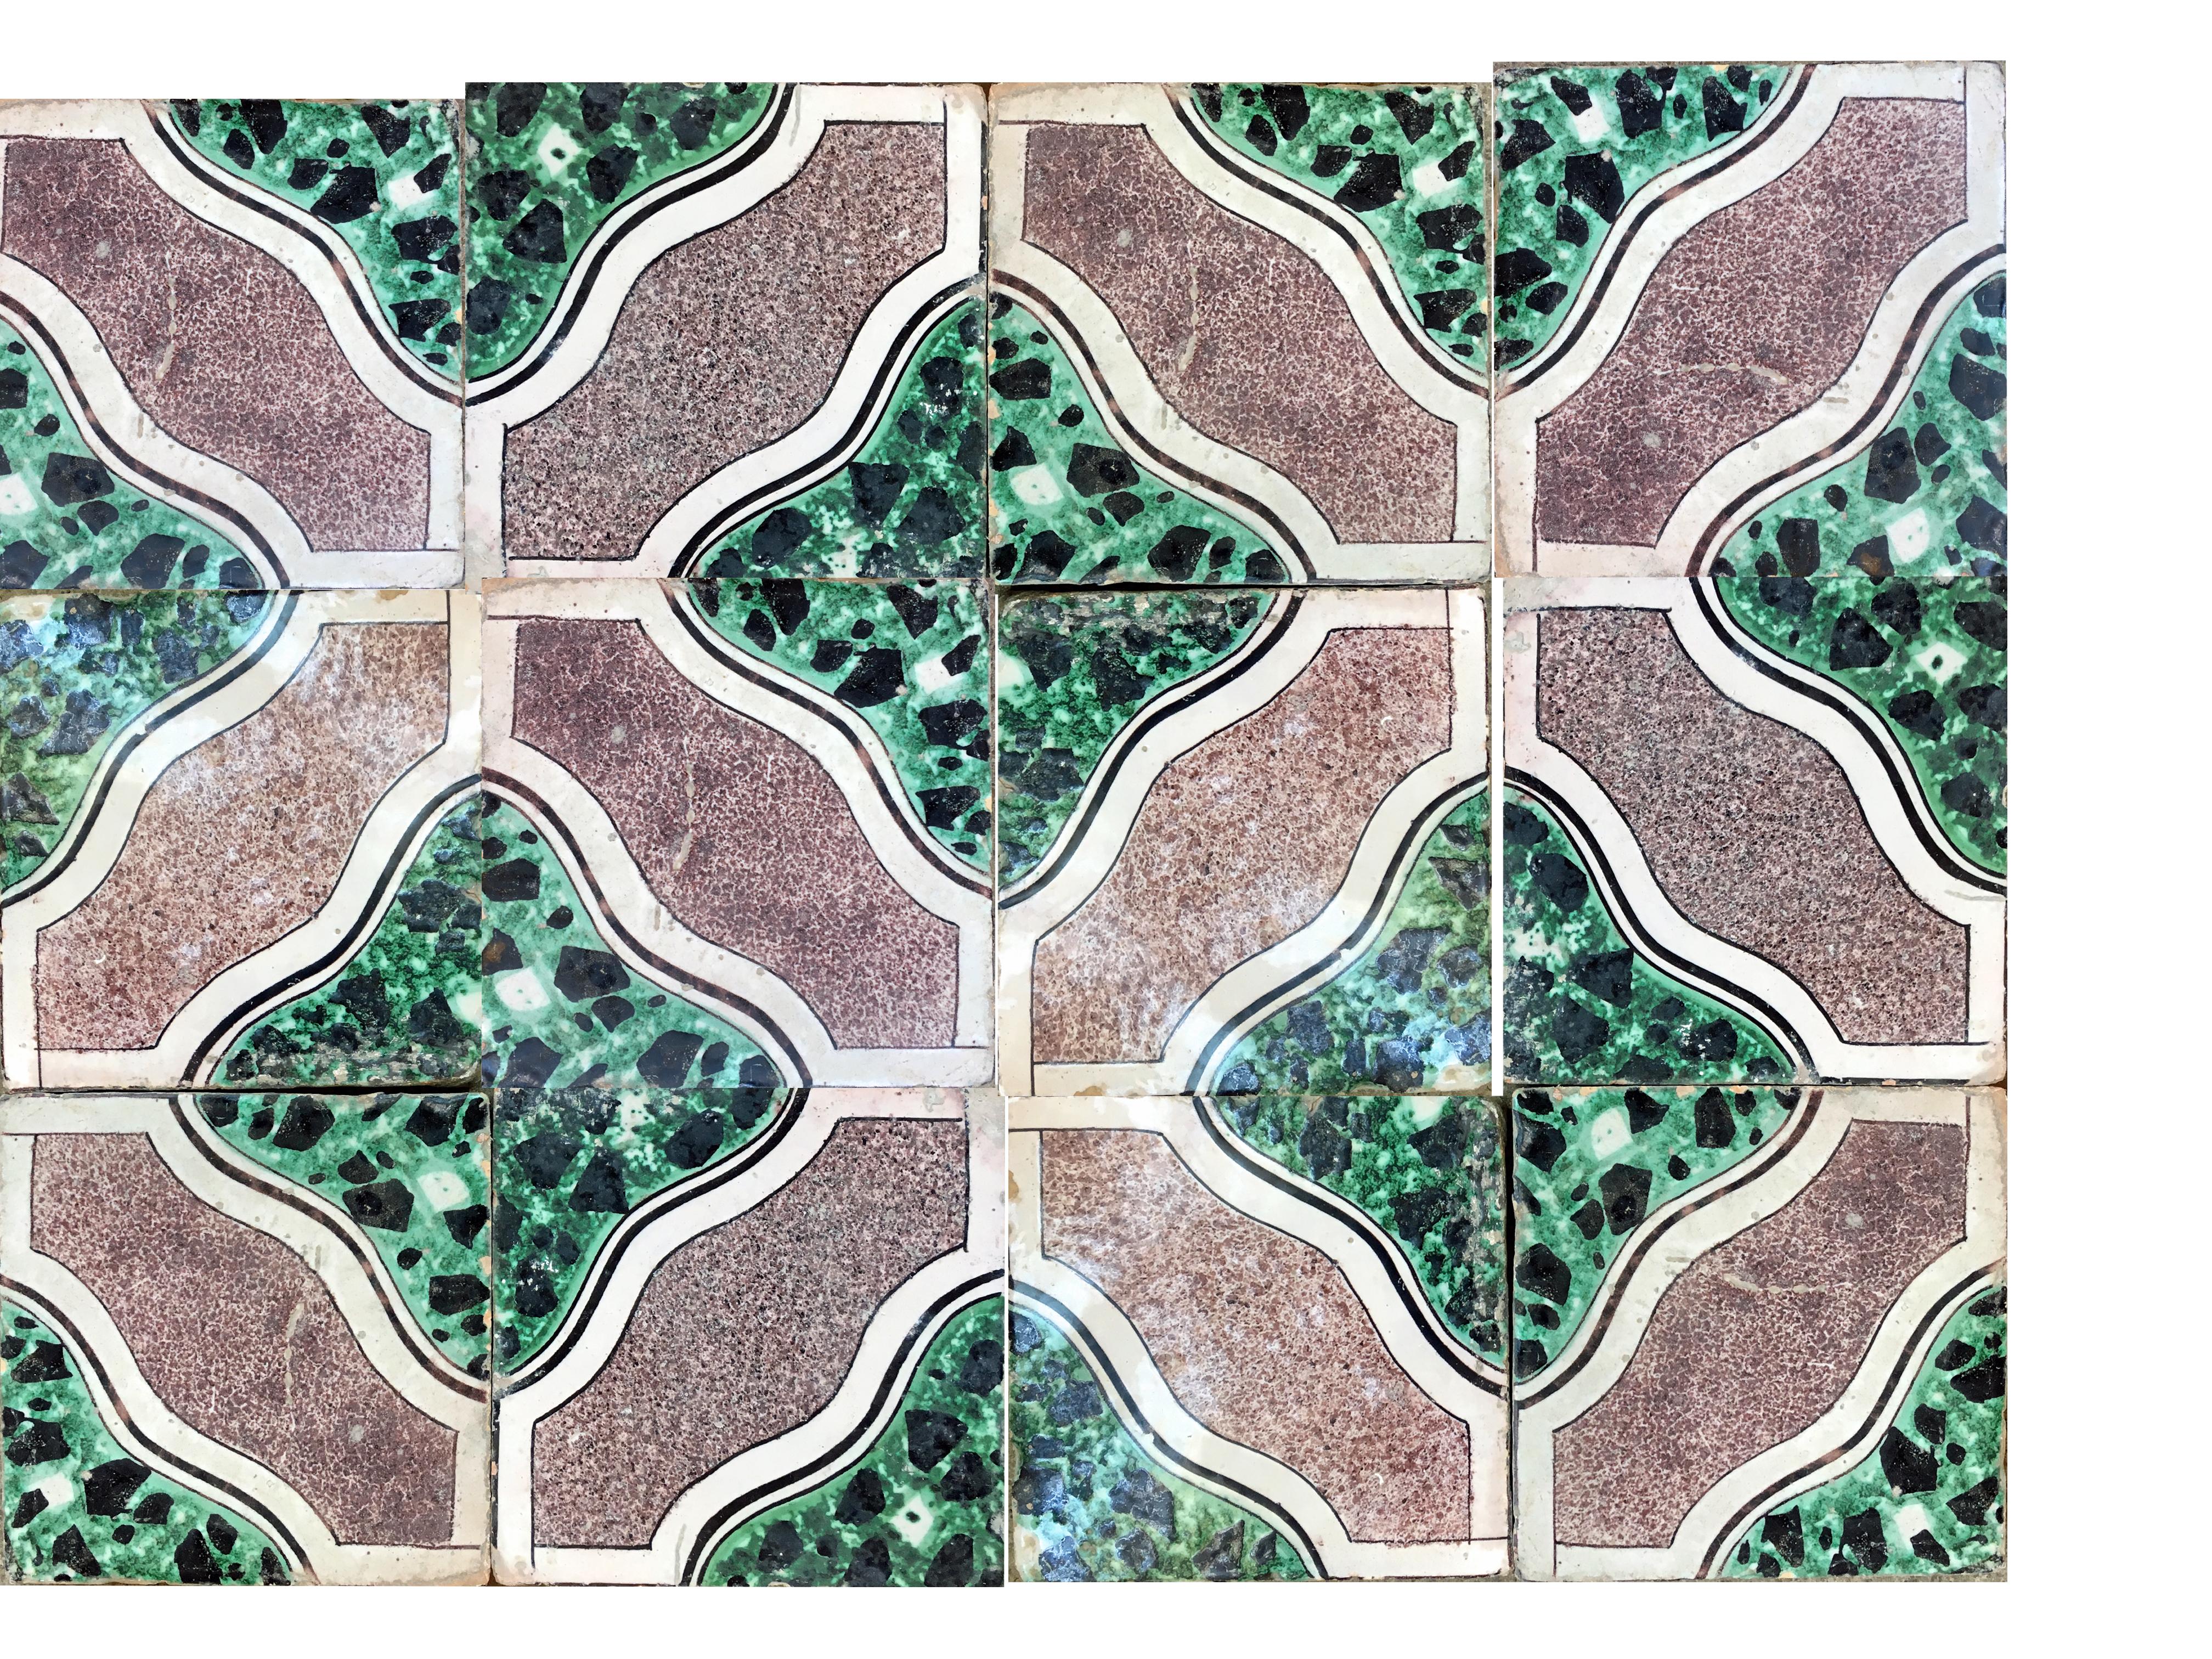 20th century Italian vintage reclaimed decorated tiles, 1920s.
68 pcs available. Approximately 2.70 sqm.